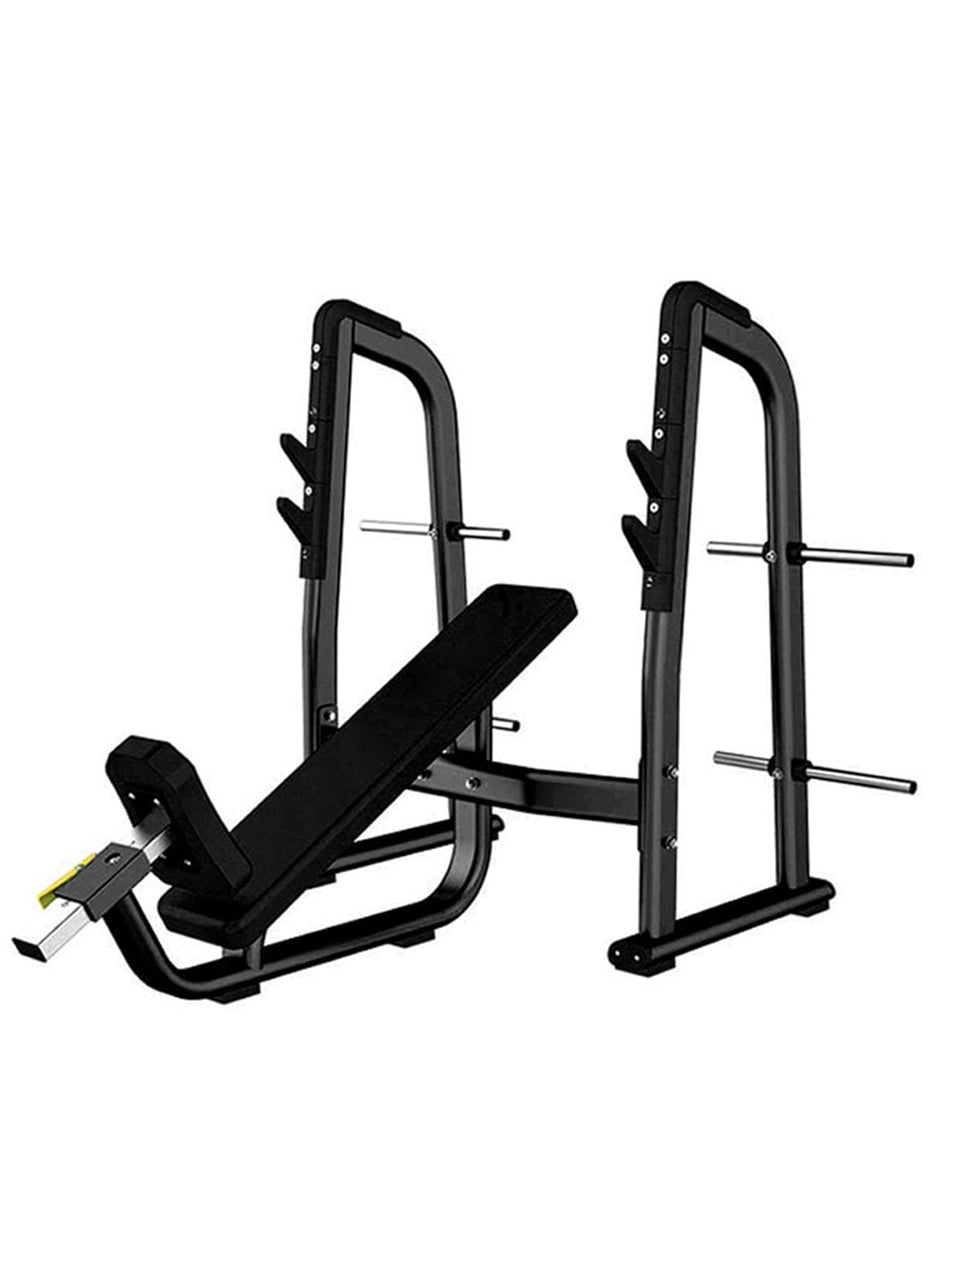 1441 Fitness Olympic Incline Bench - 41FF42B